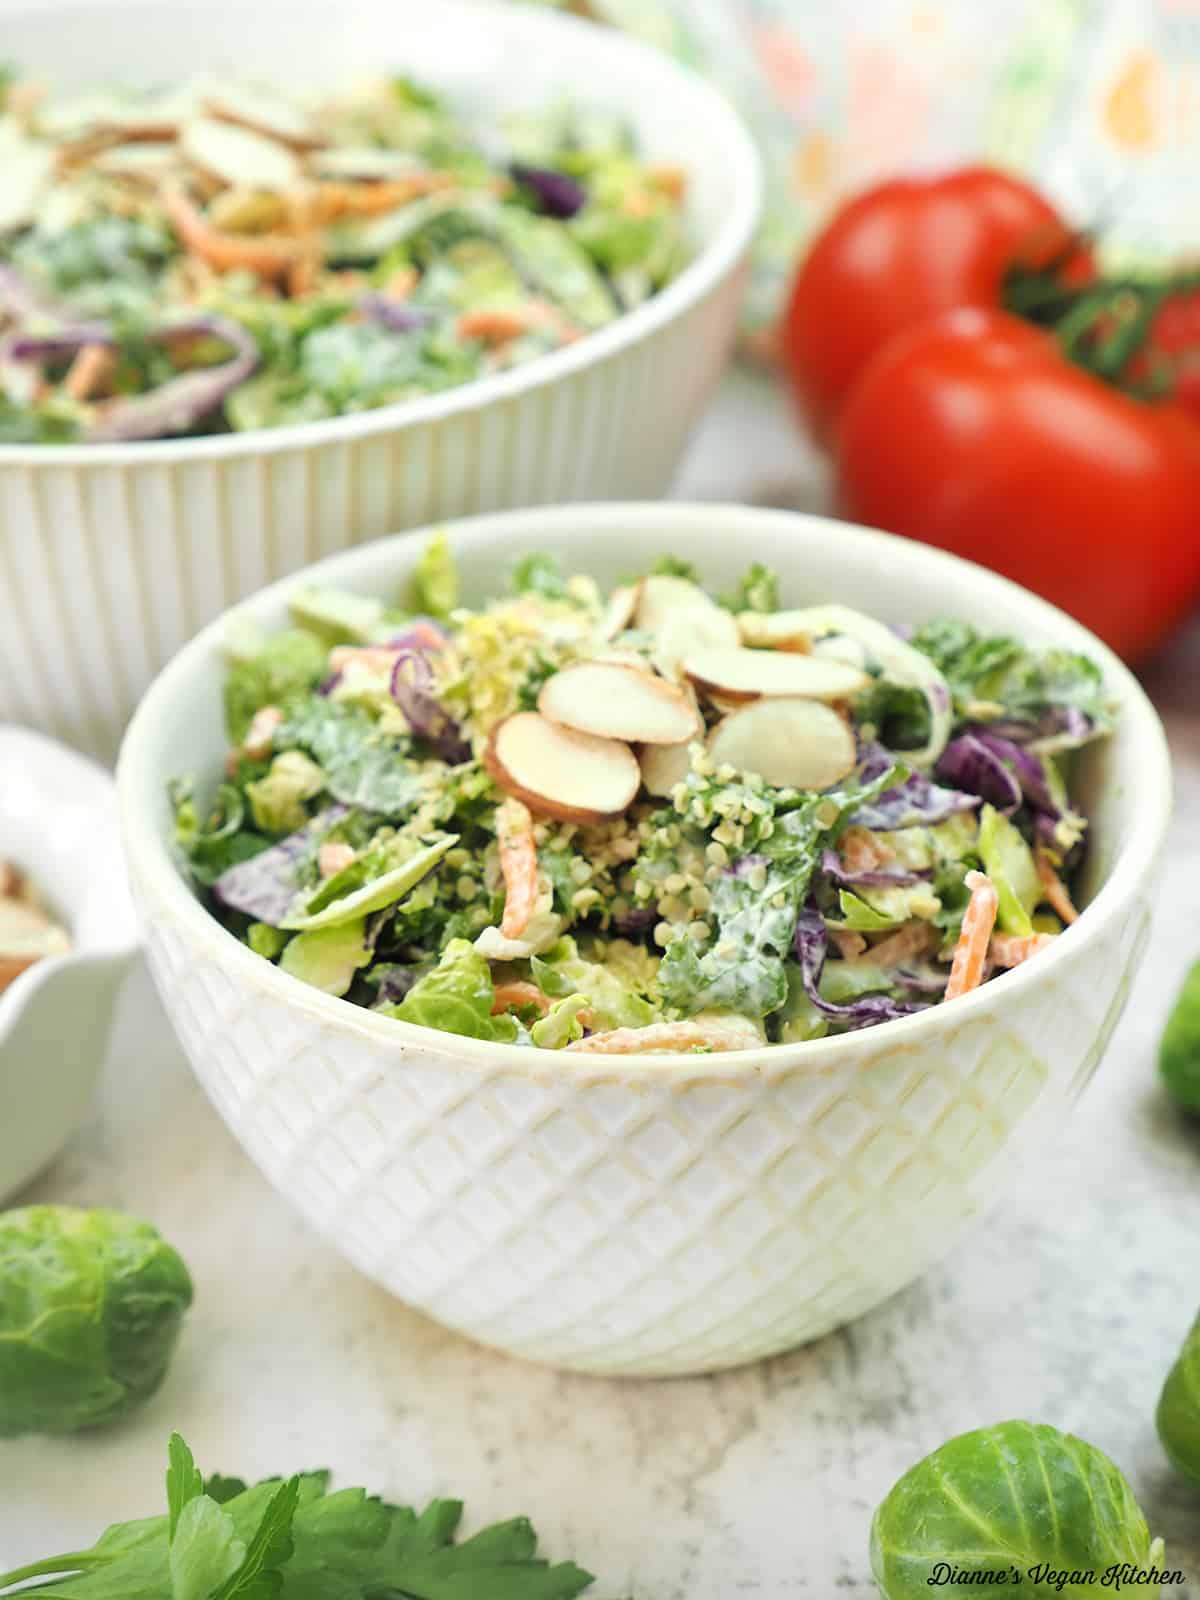 two bowls of salad with tomatoes and brussels sprouts